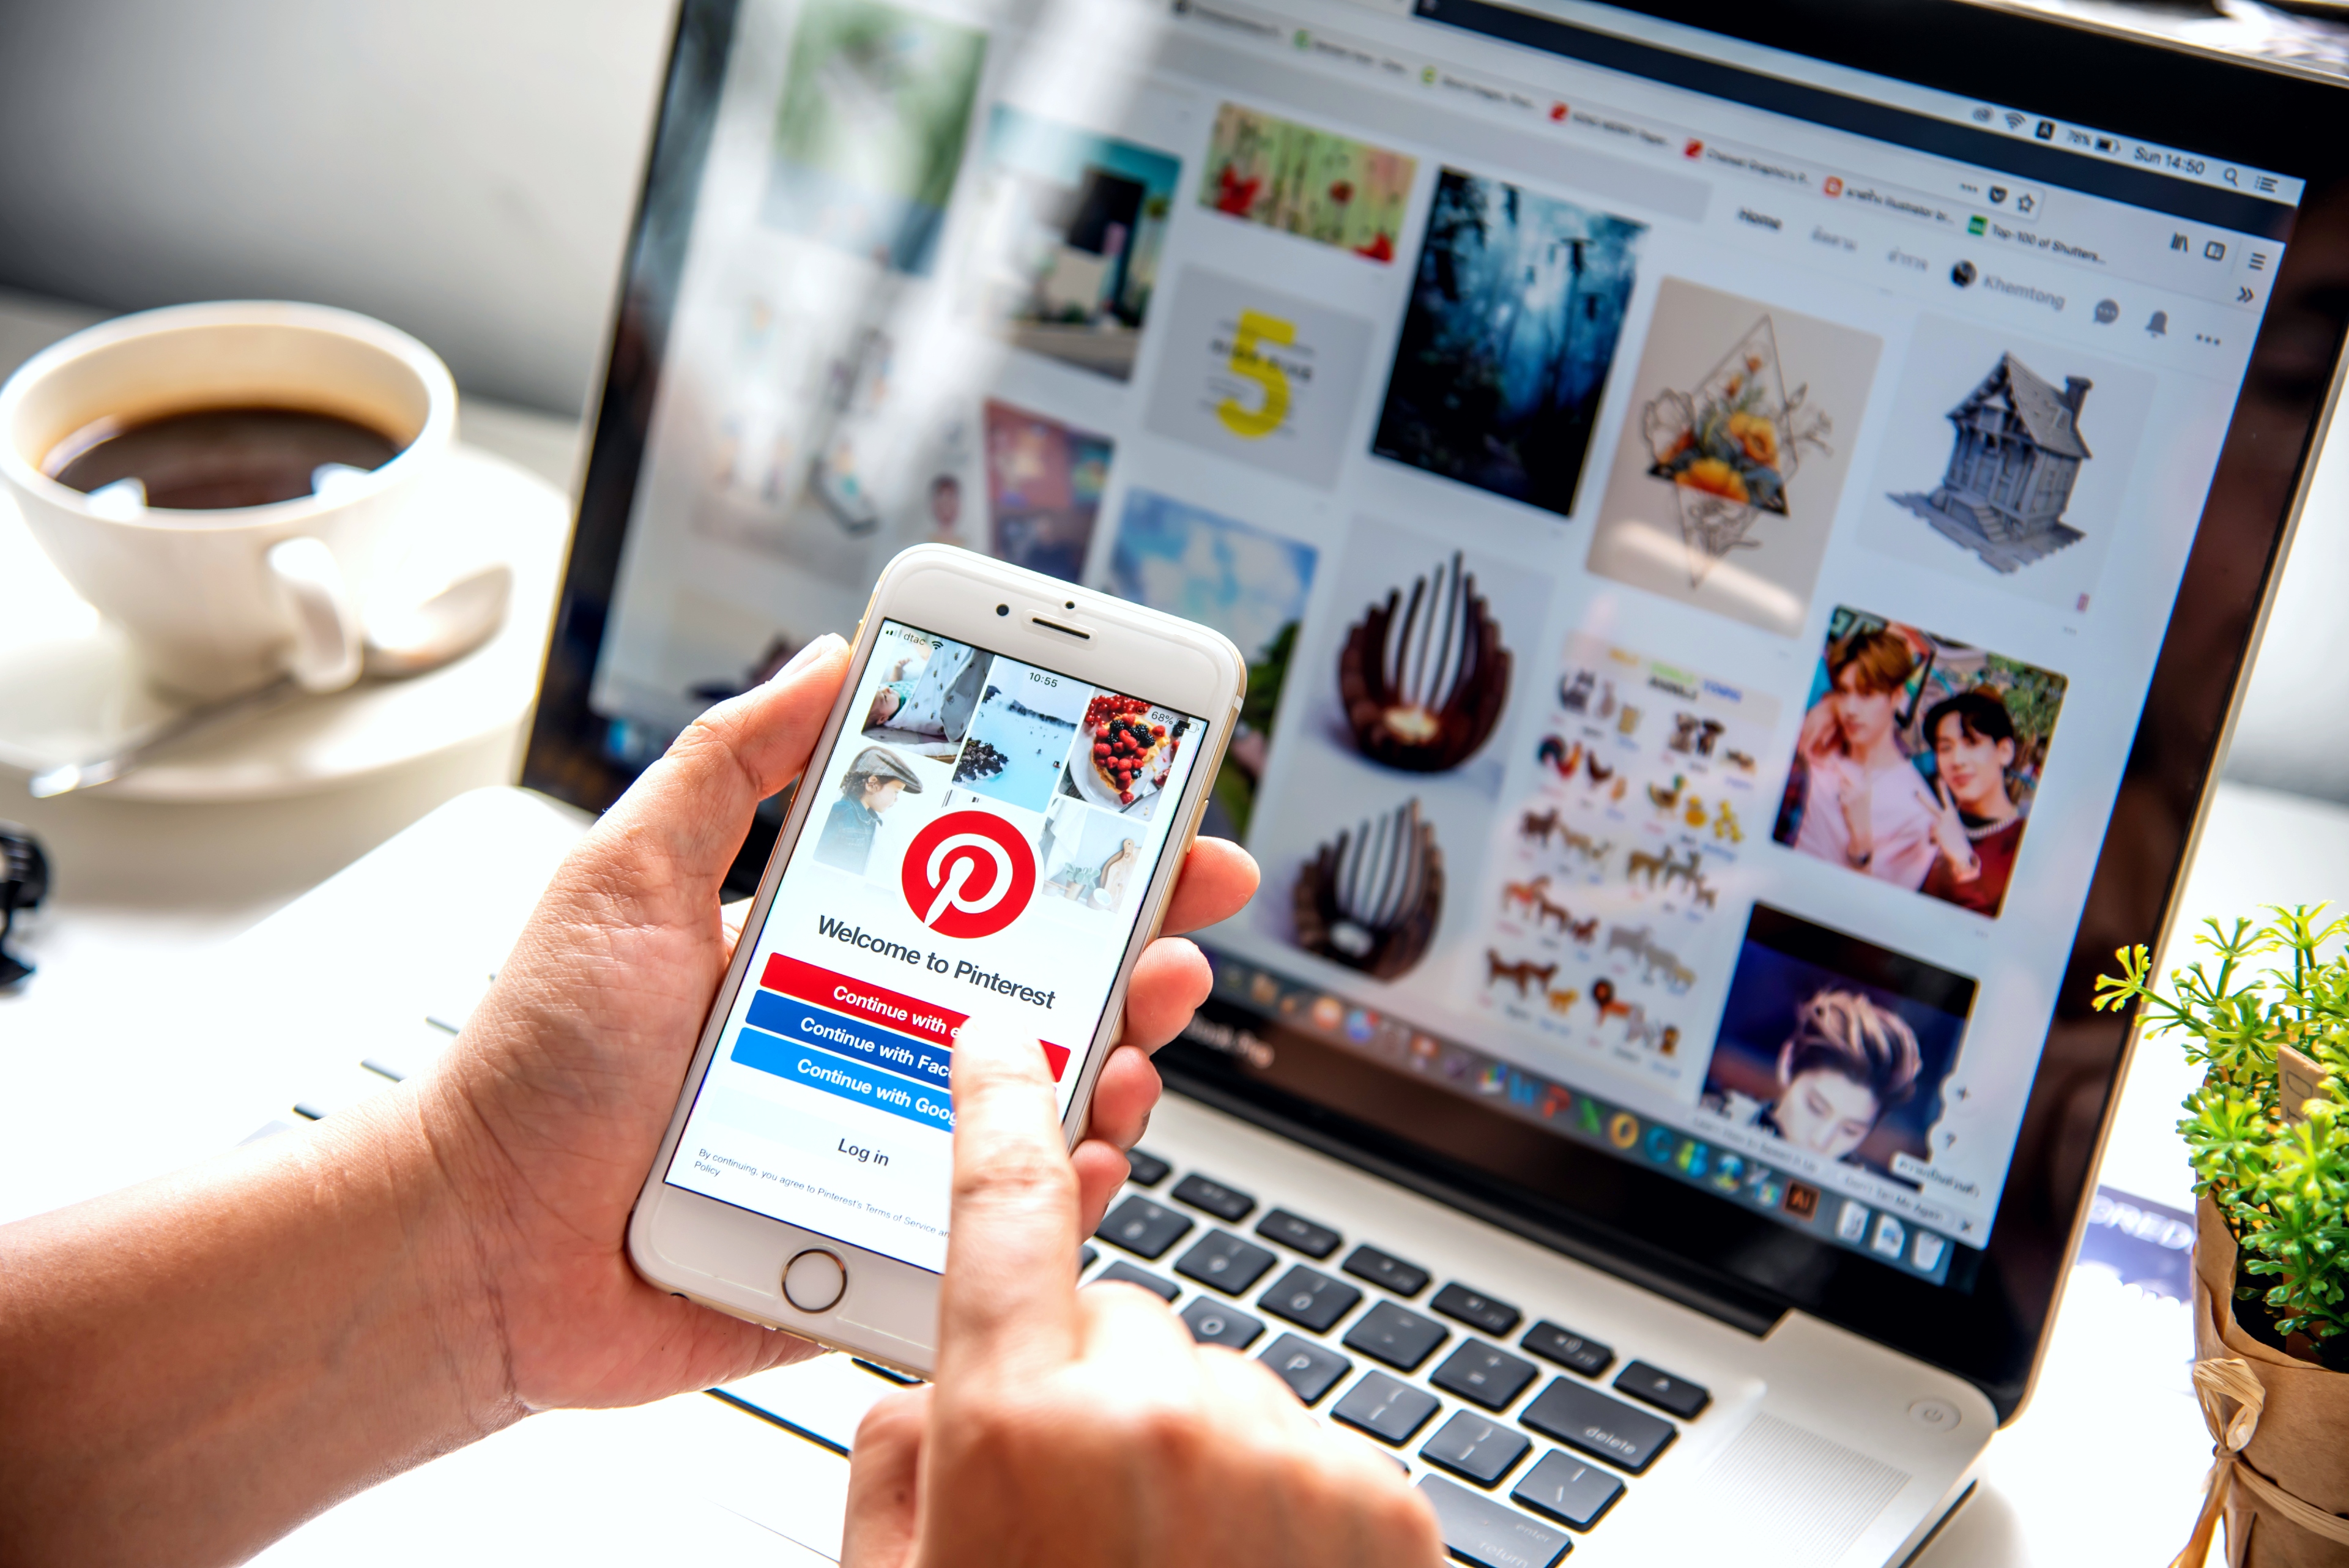 Can Pinterest (PINS) stock become the next Facebook (FB)?